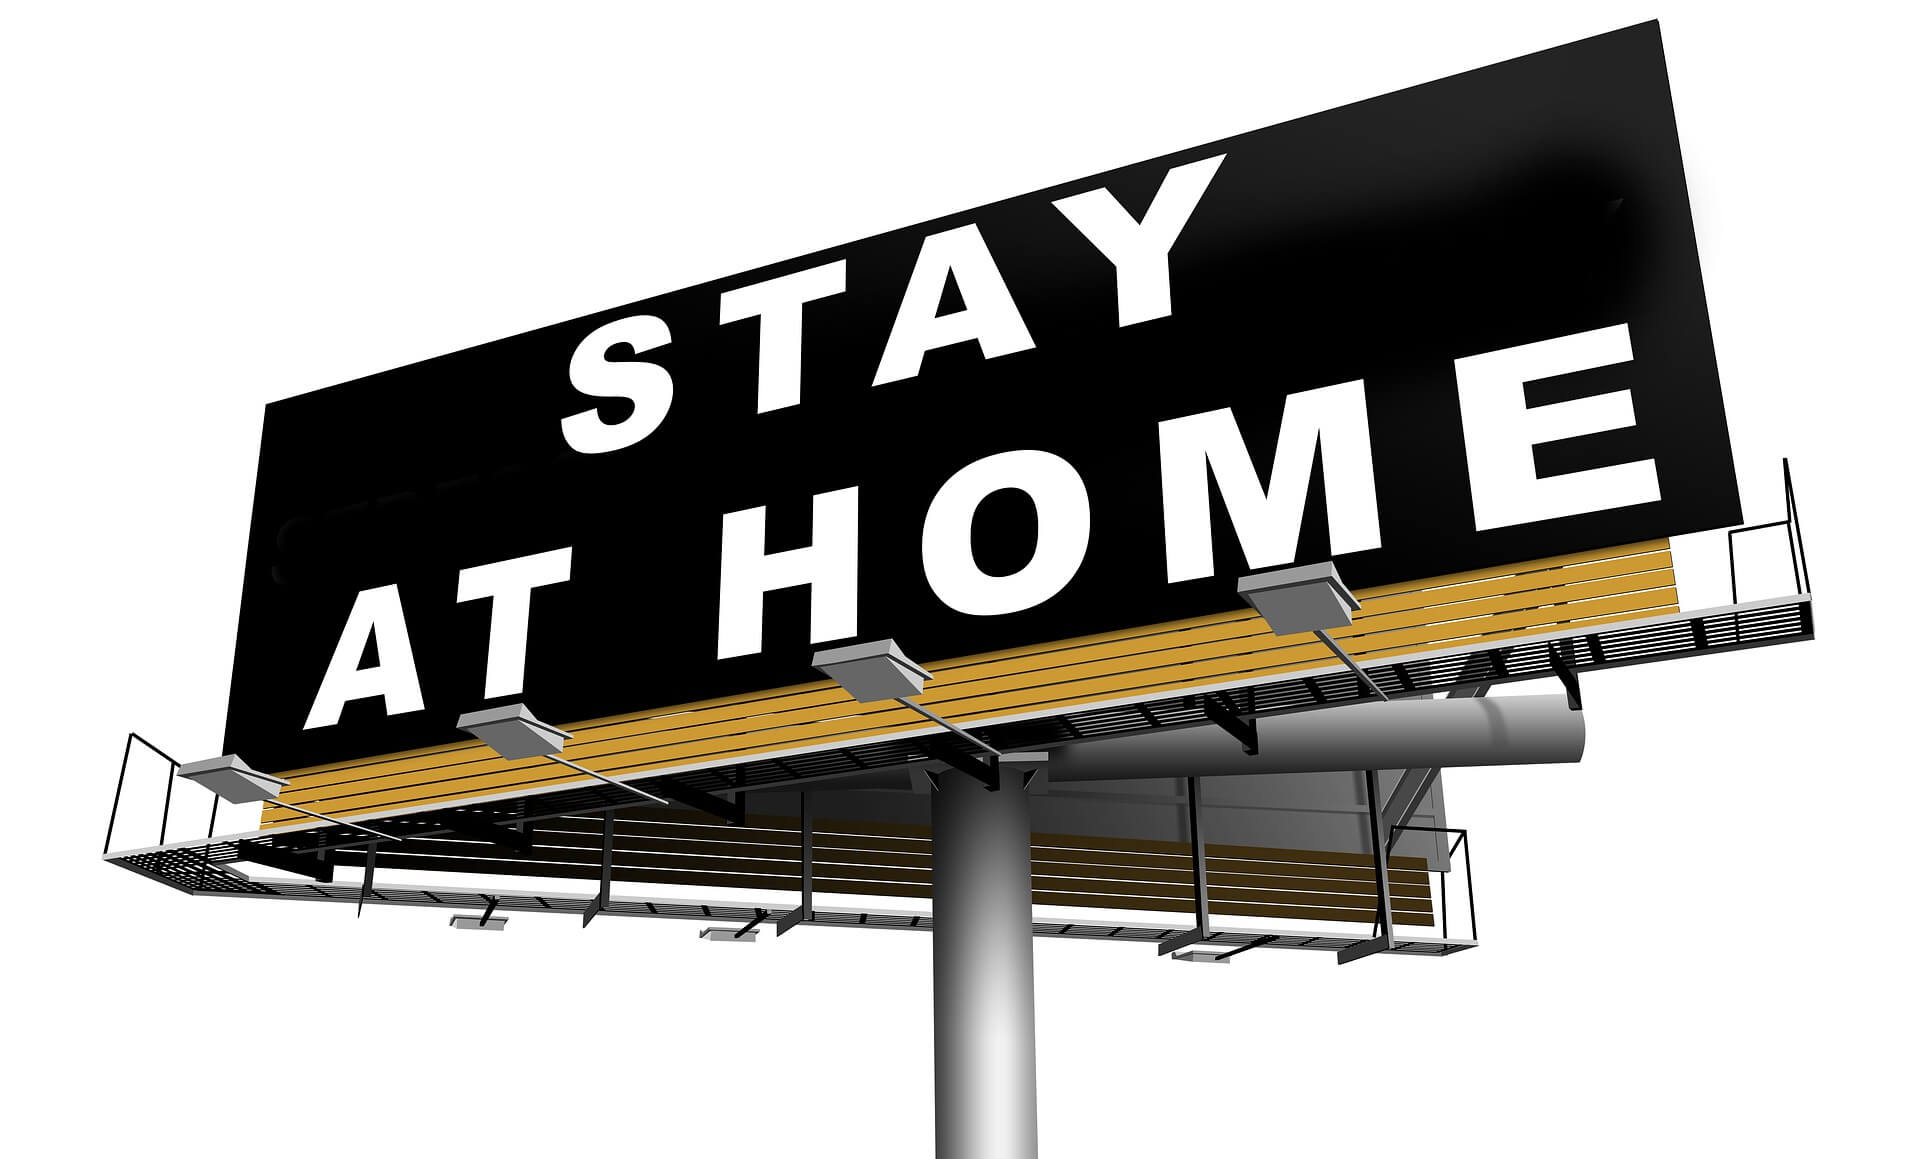 Stay at home sign